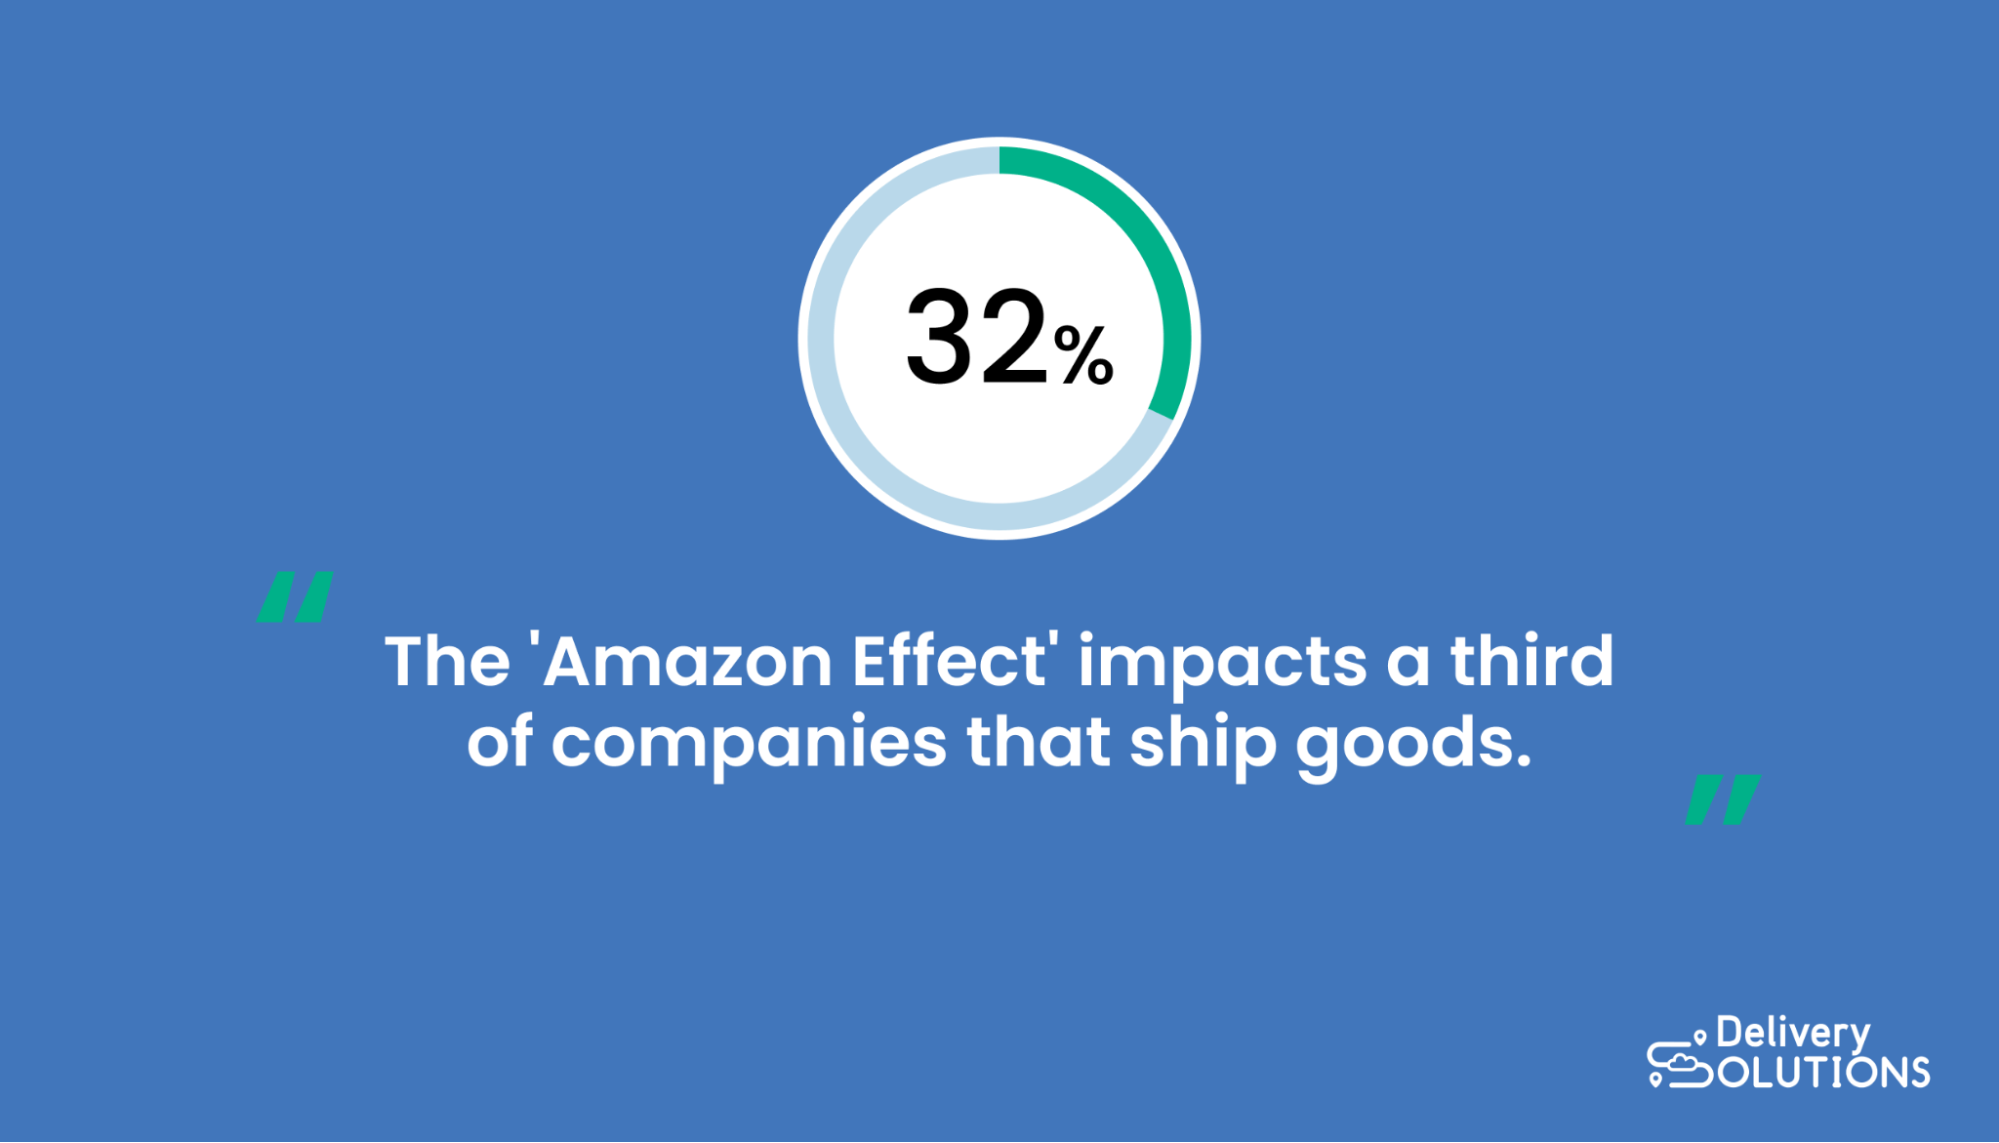 Statistic on the Amazon Effect for shippers